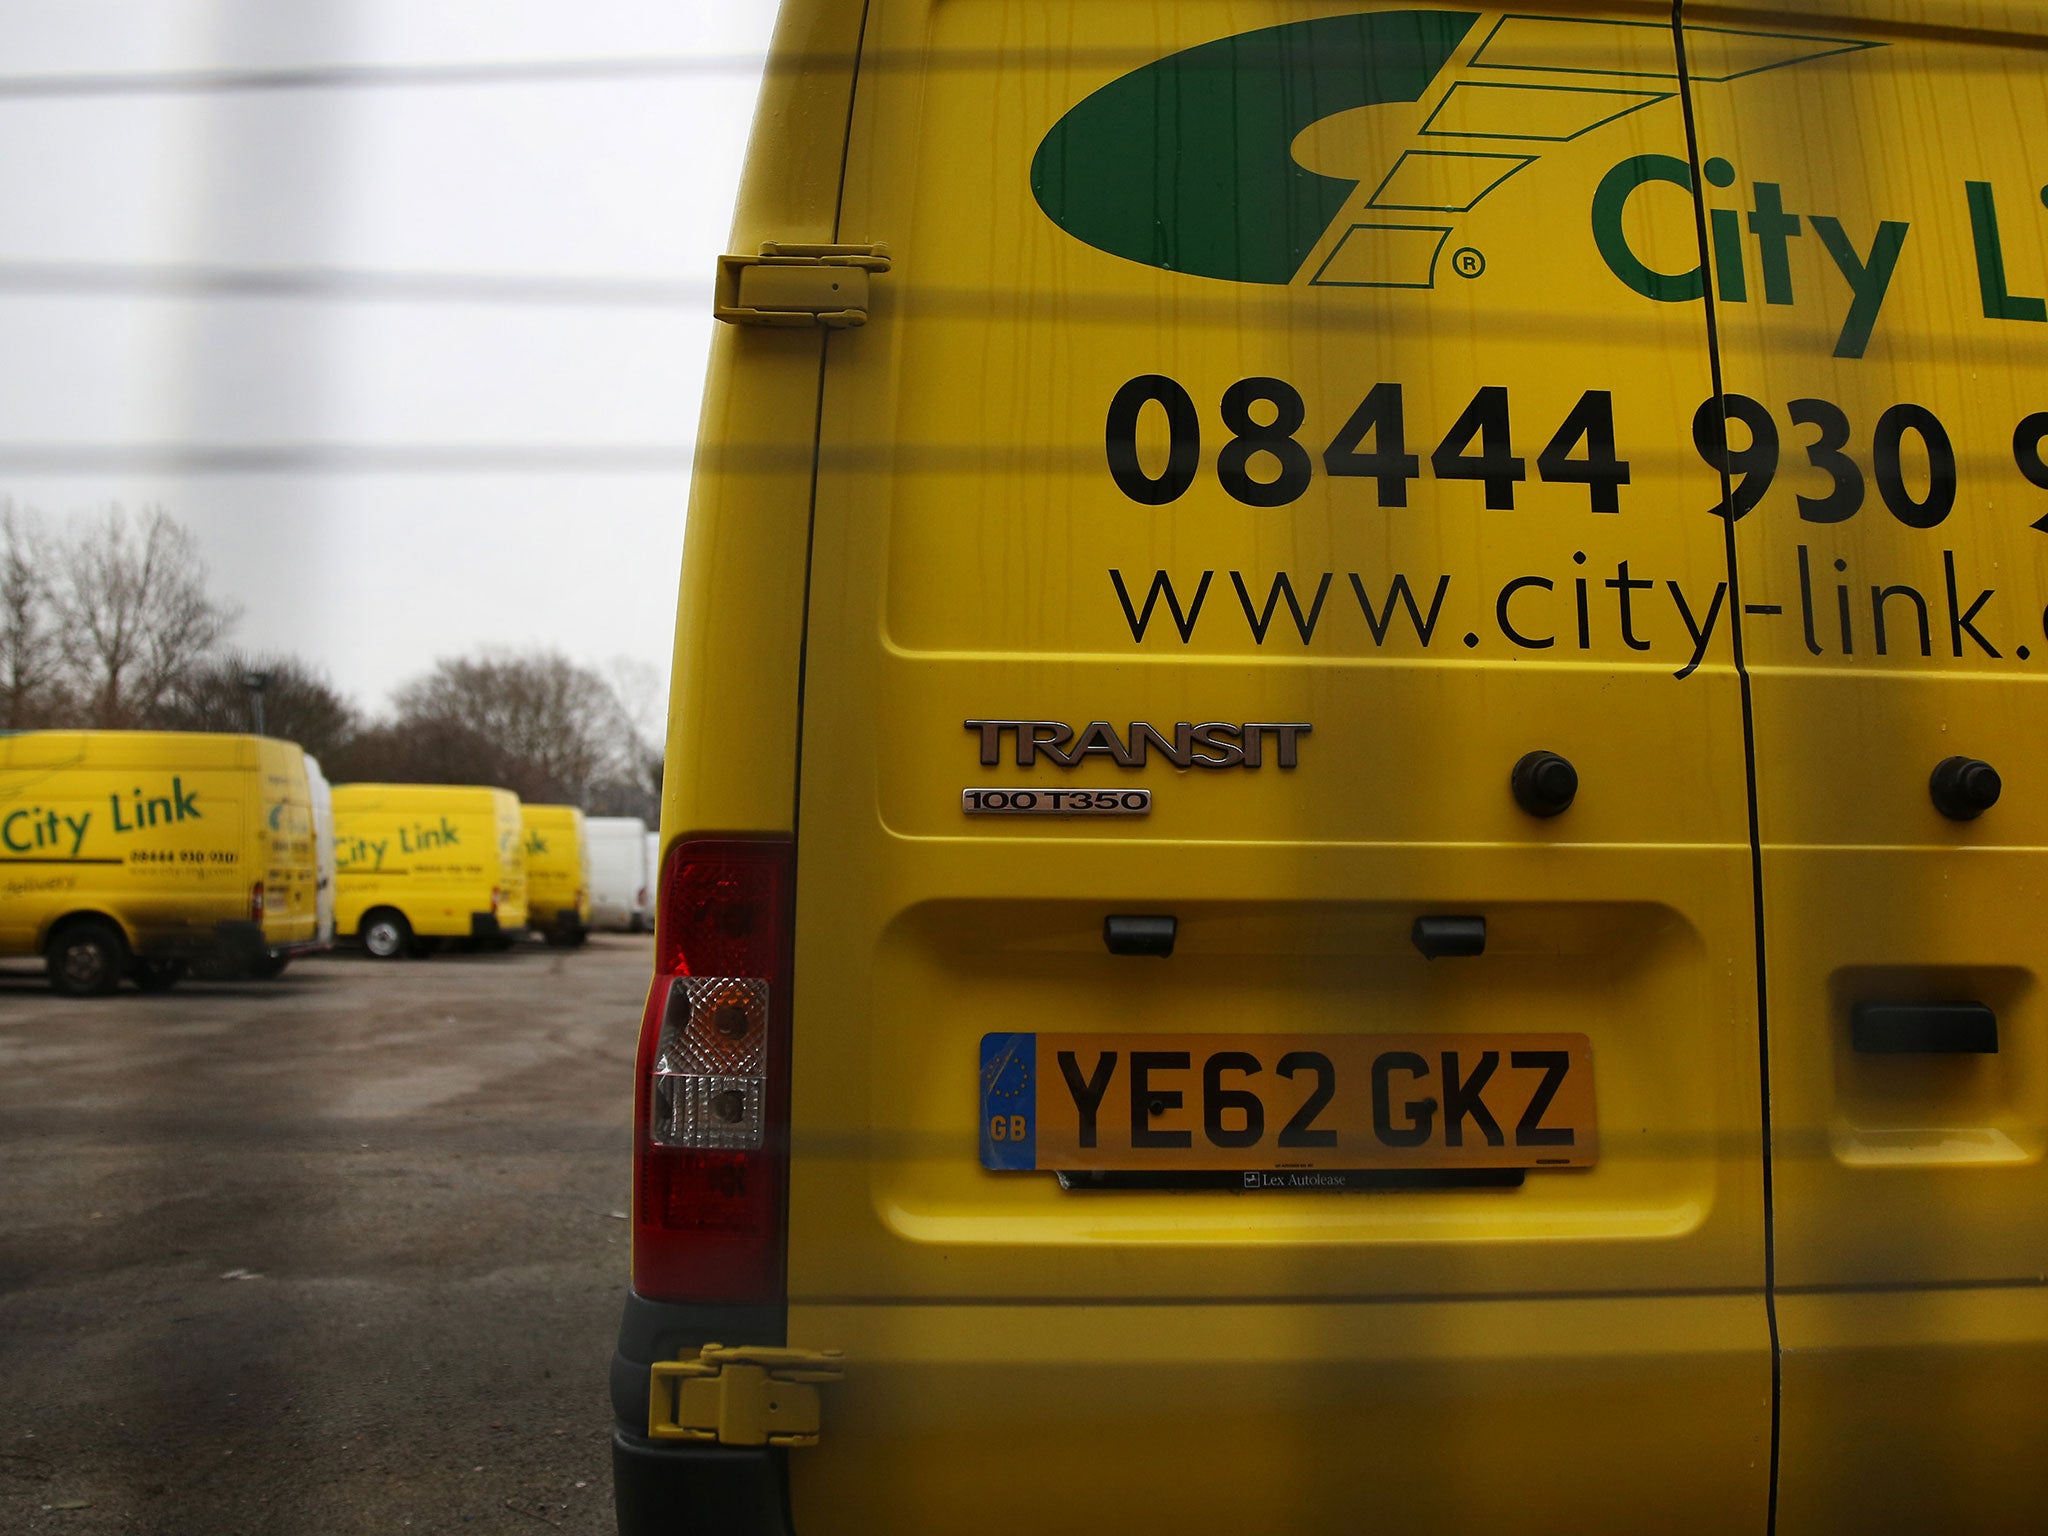 City Link was sold for £1 by its previous owner last year